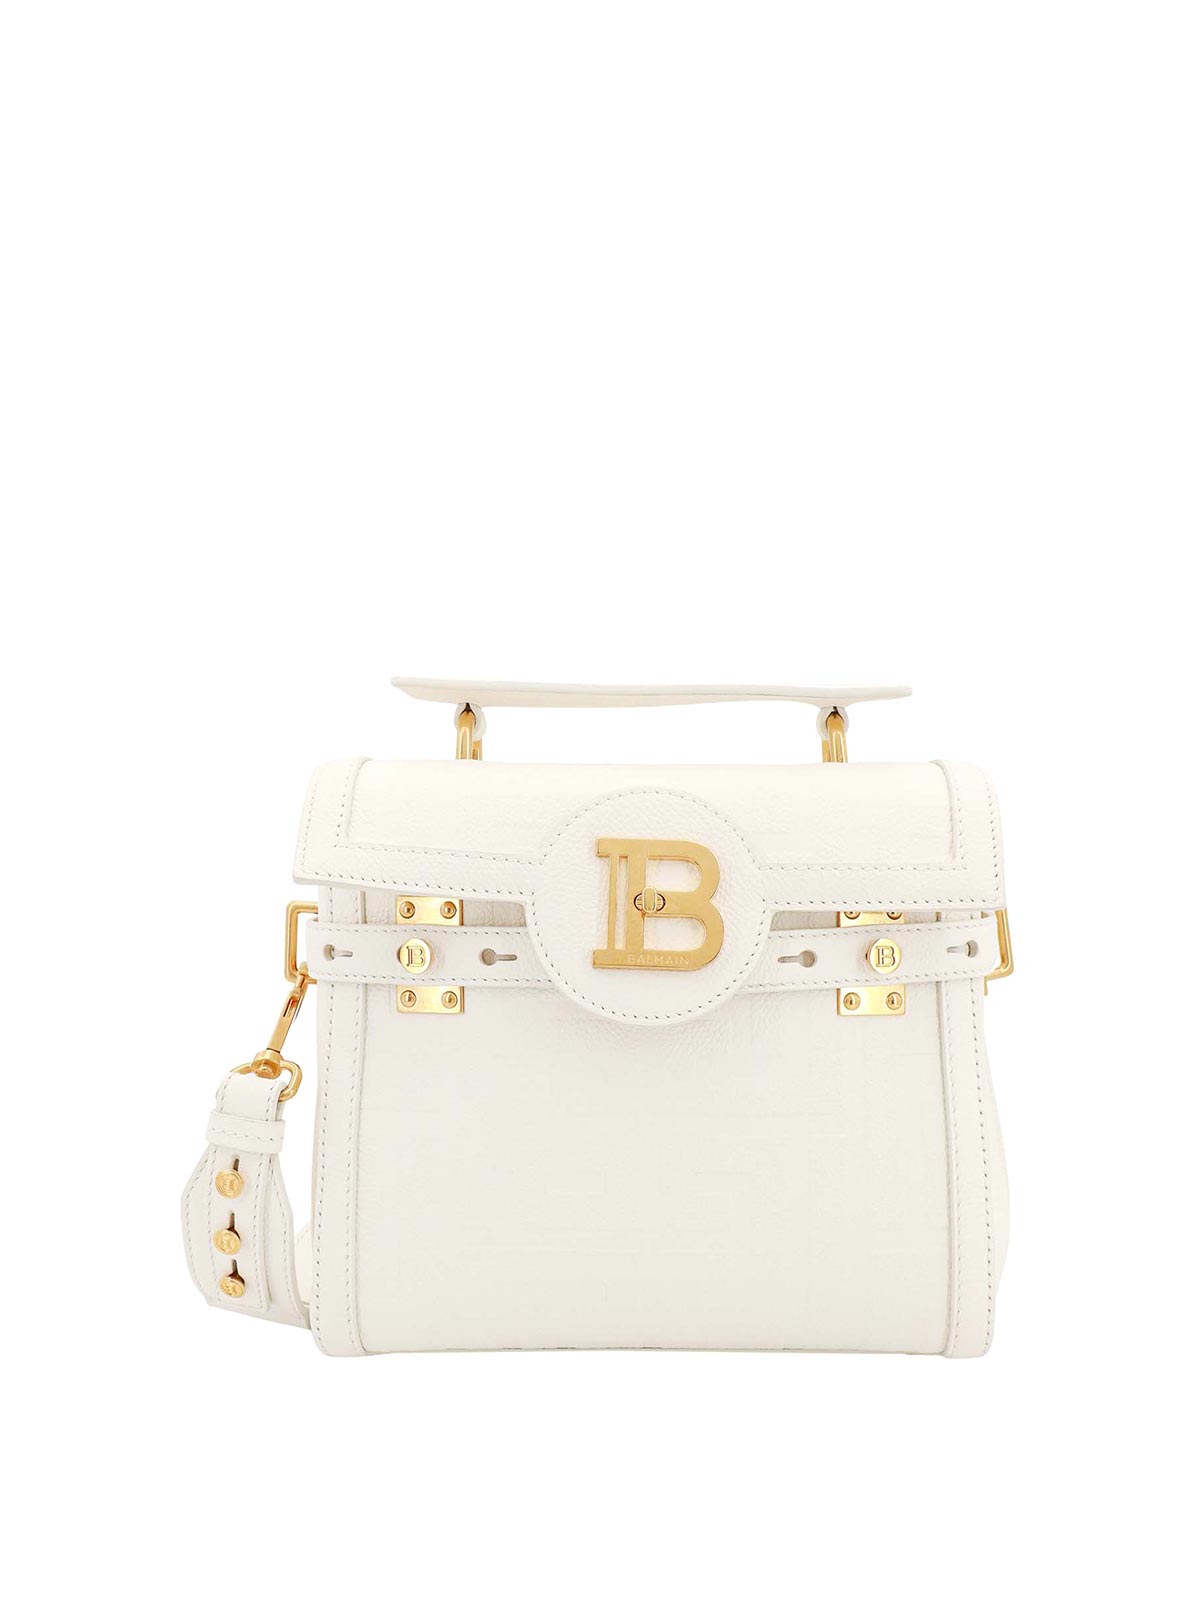 Balmain Leather Shoulder Bag With Frontal Monogram In White